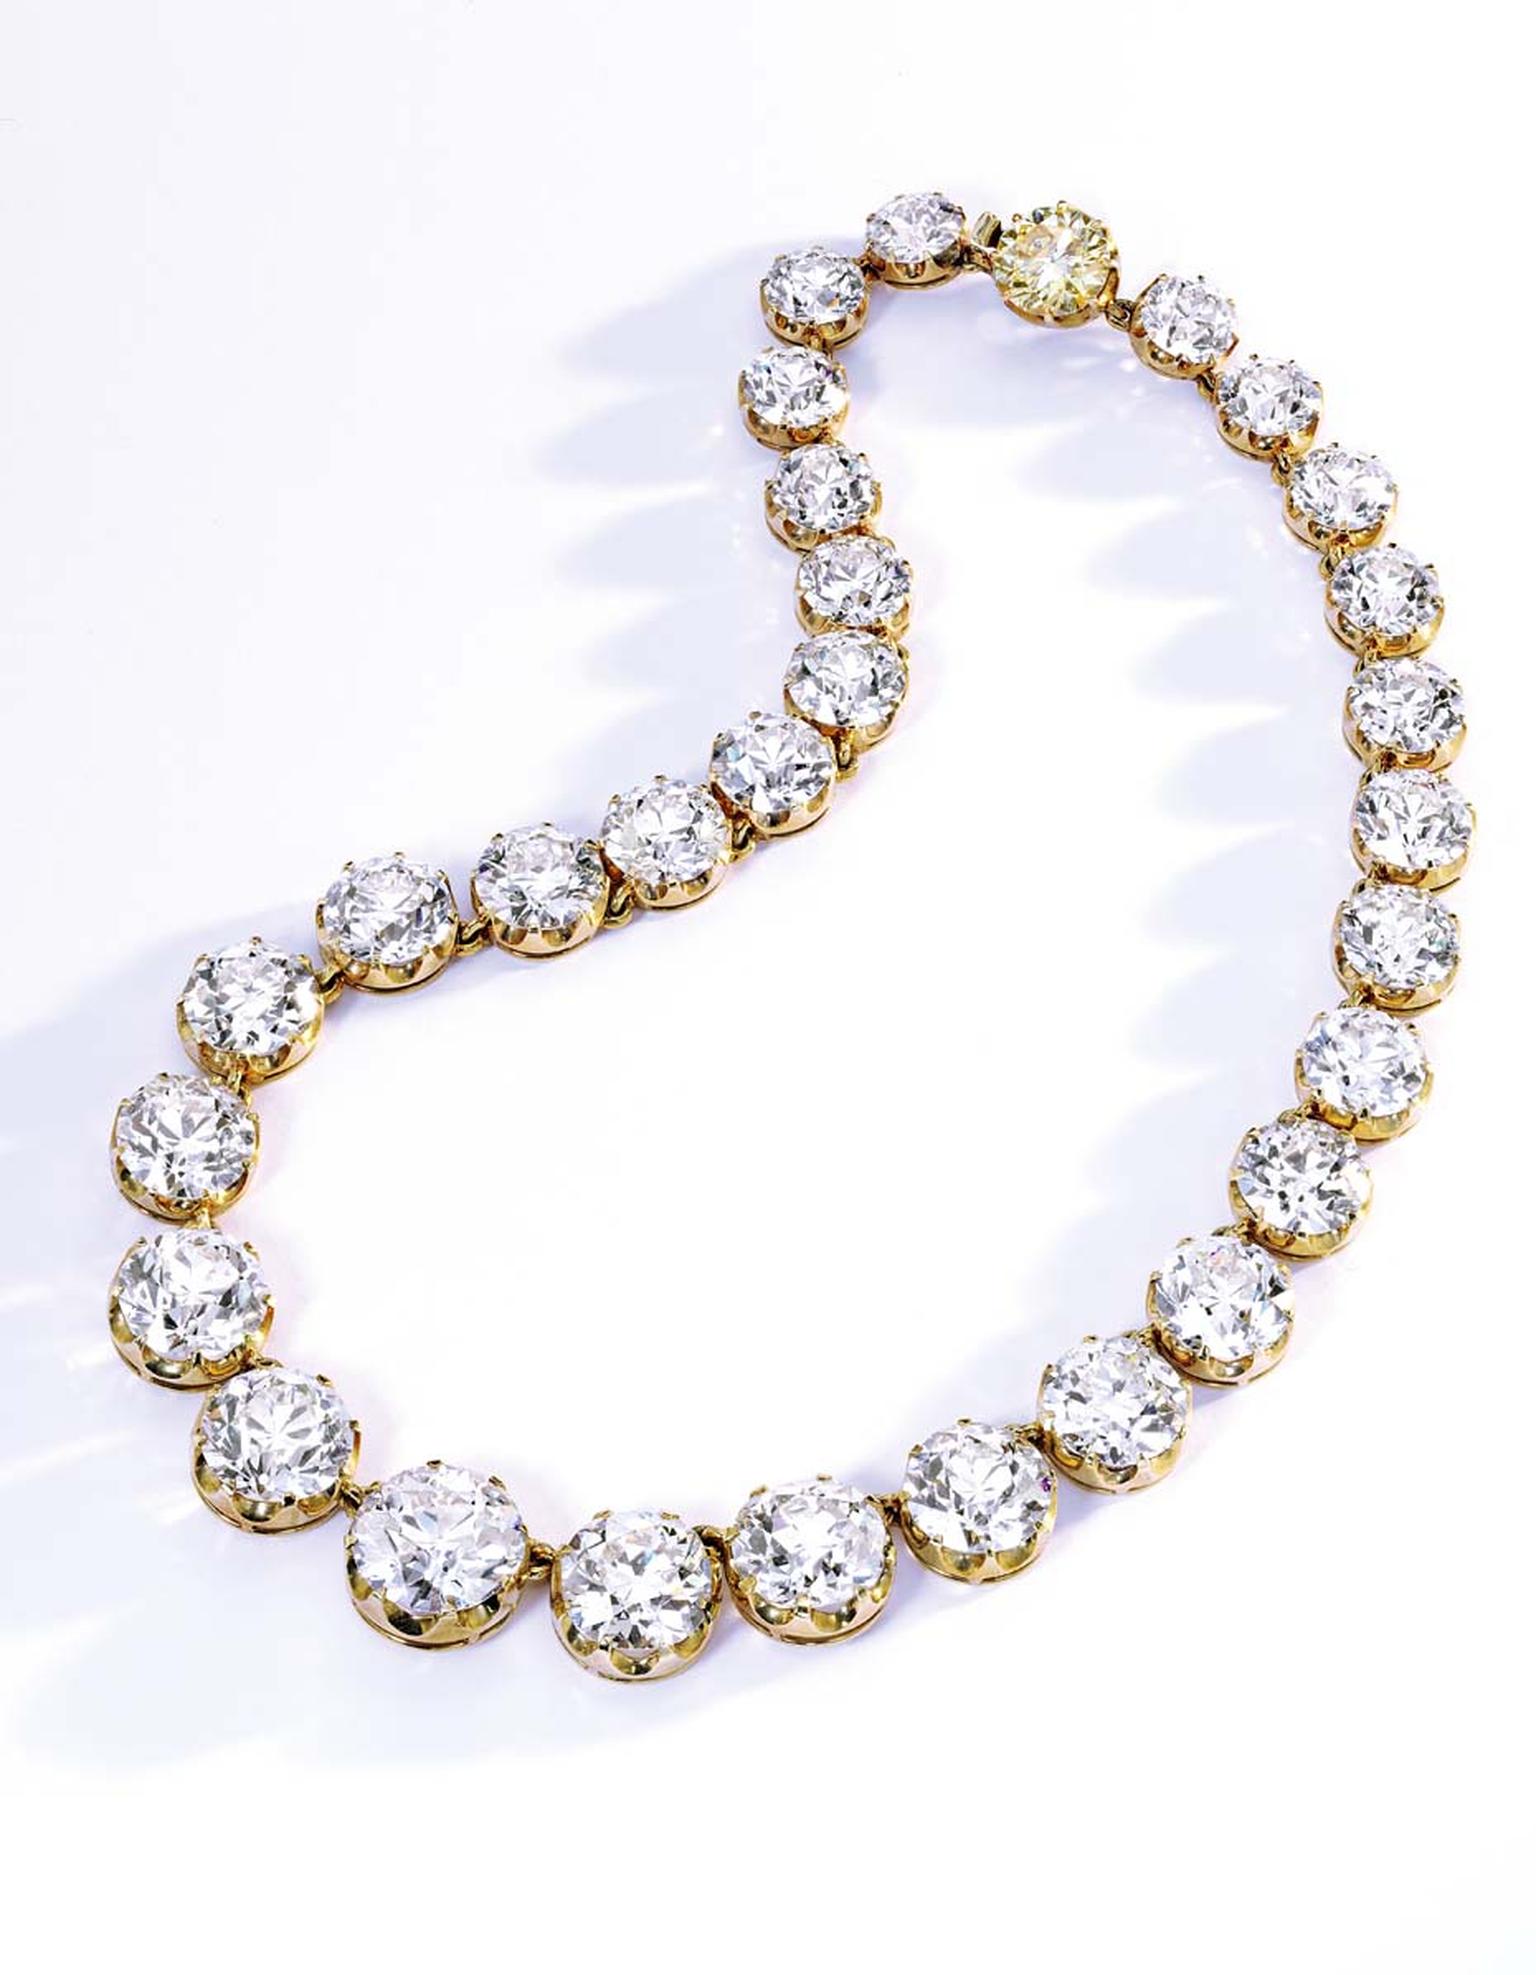 Sotheby's auction of Bunny Mellon's jewels this November in New York includes a Cartier Rivière necklace dating back to around 1900 featuring a tapered line of 29 old European-cut diamonds held together with a 4.20ct Fancy Deep Yellow diamond clasp (estim